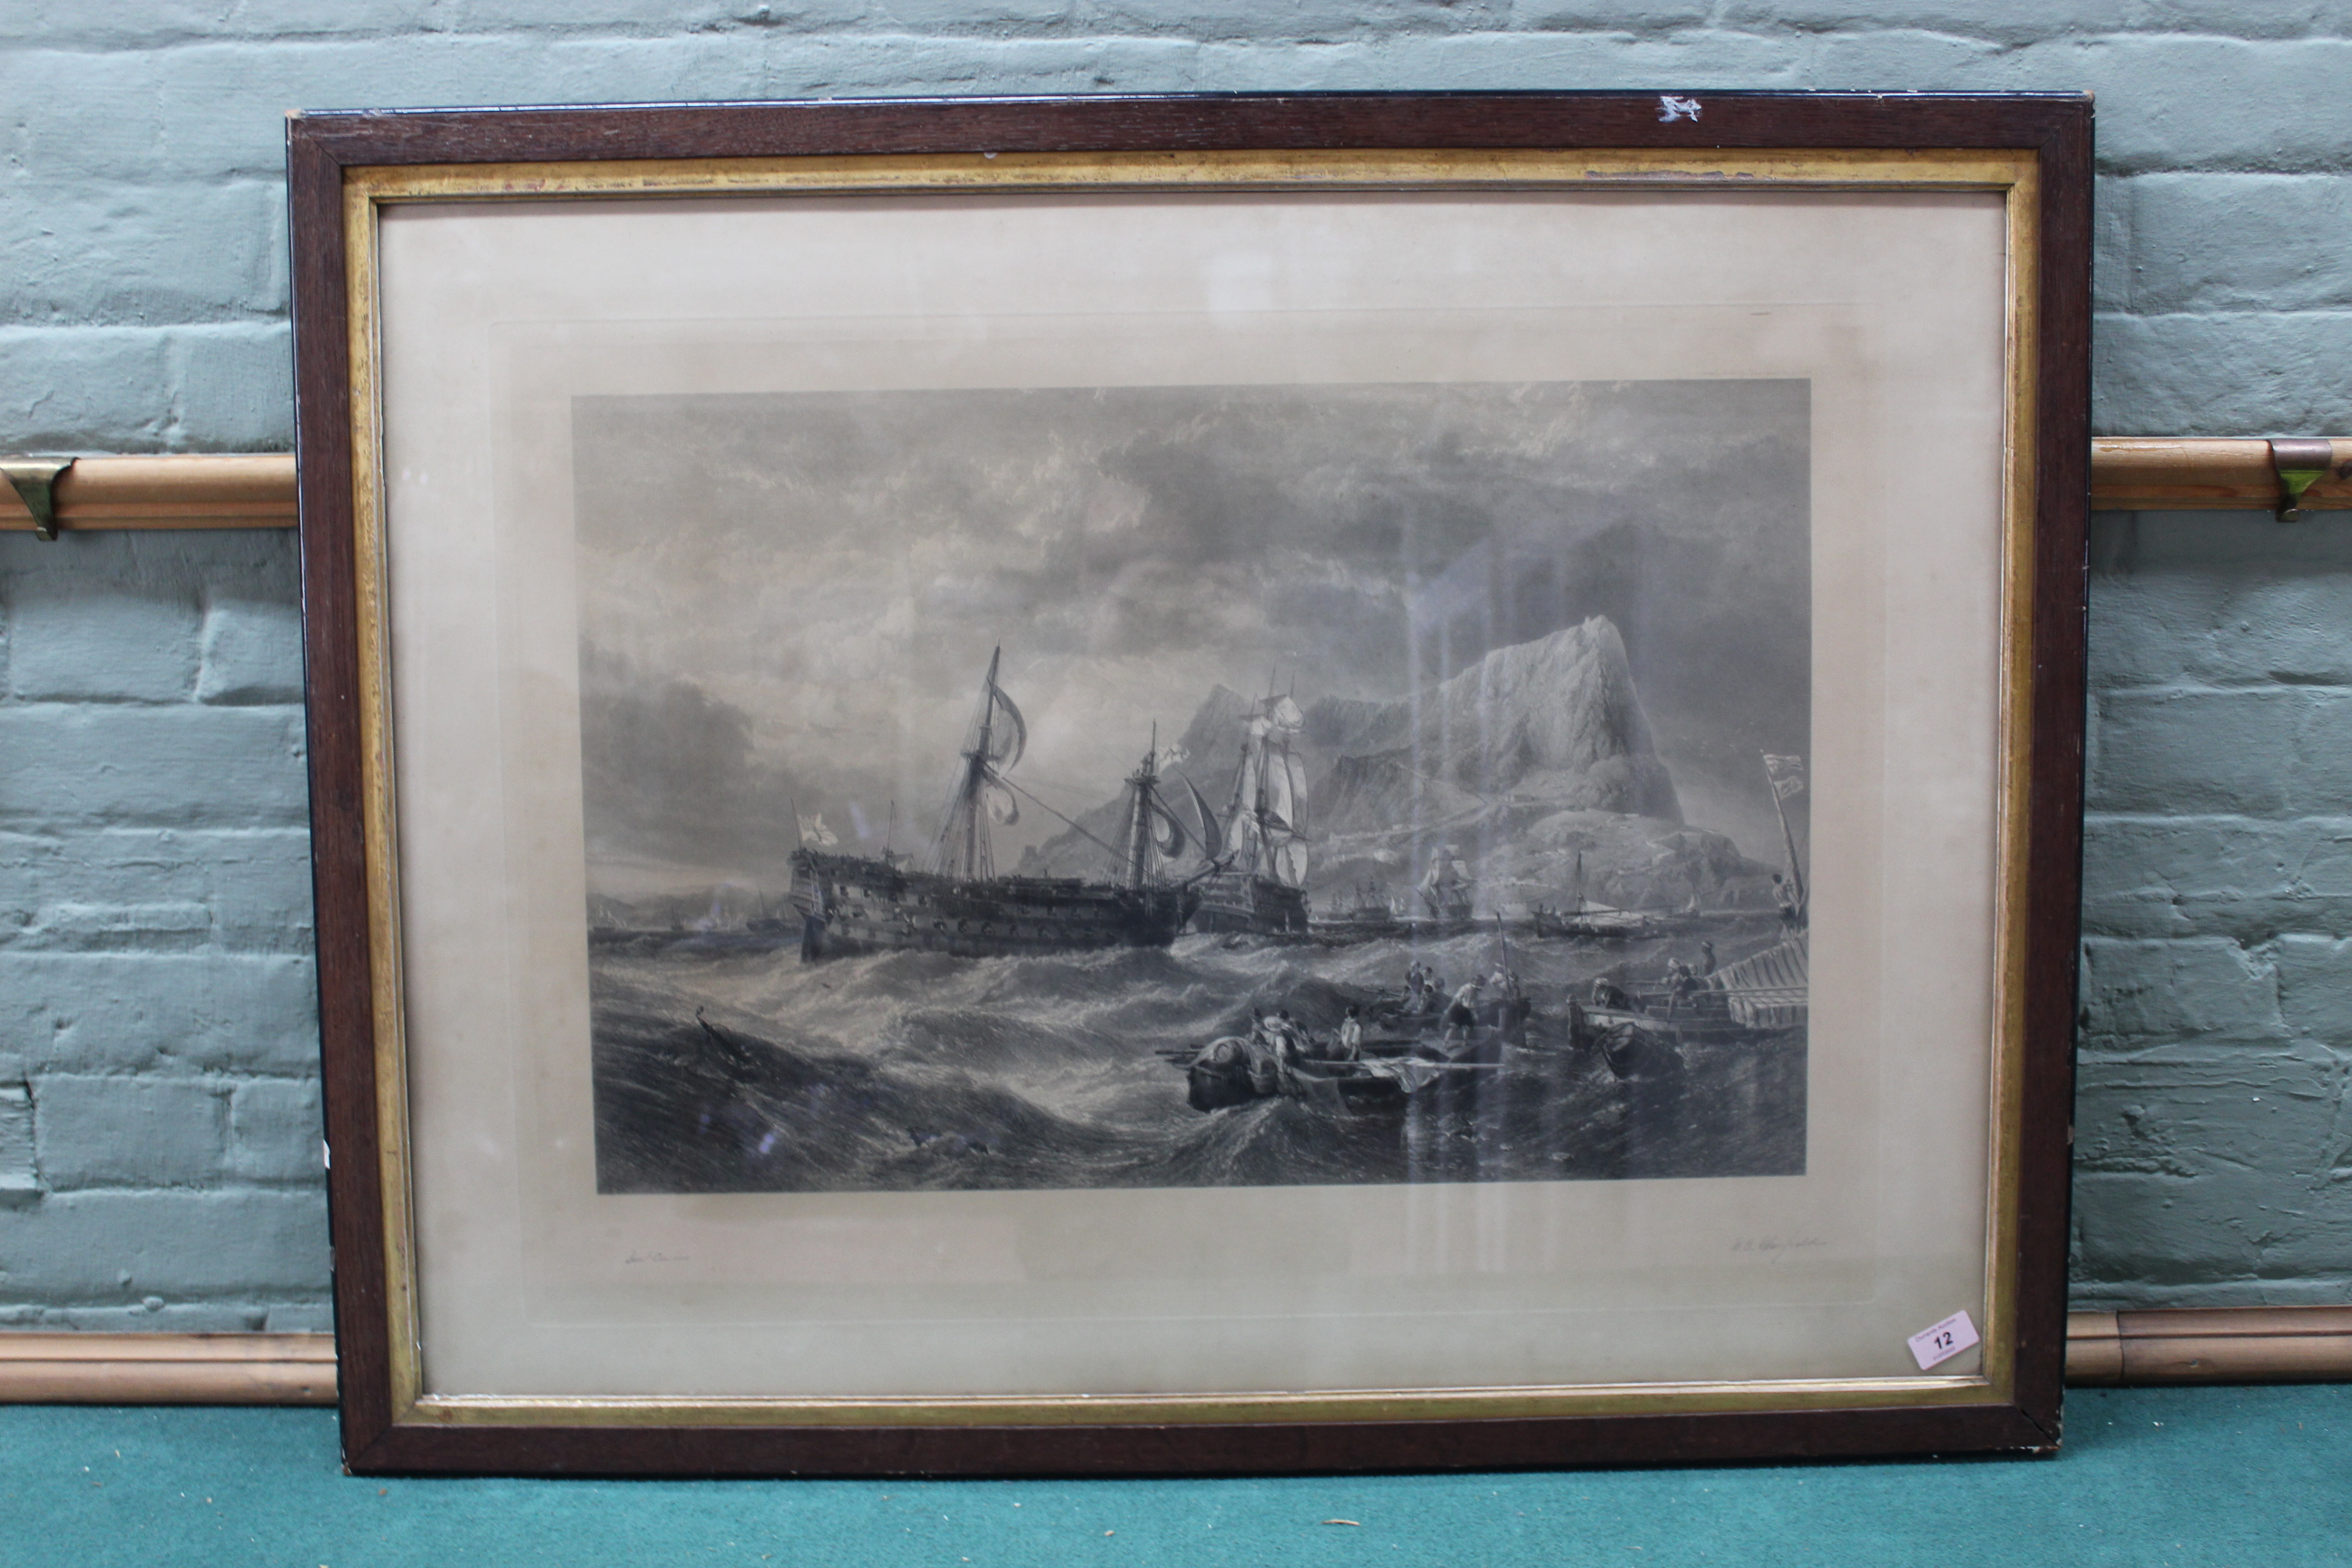 A large late 19th Century black and white print of ships off rocky shore with supply boats in